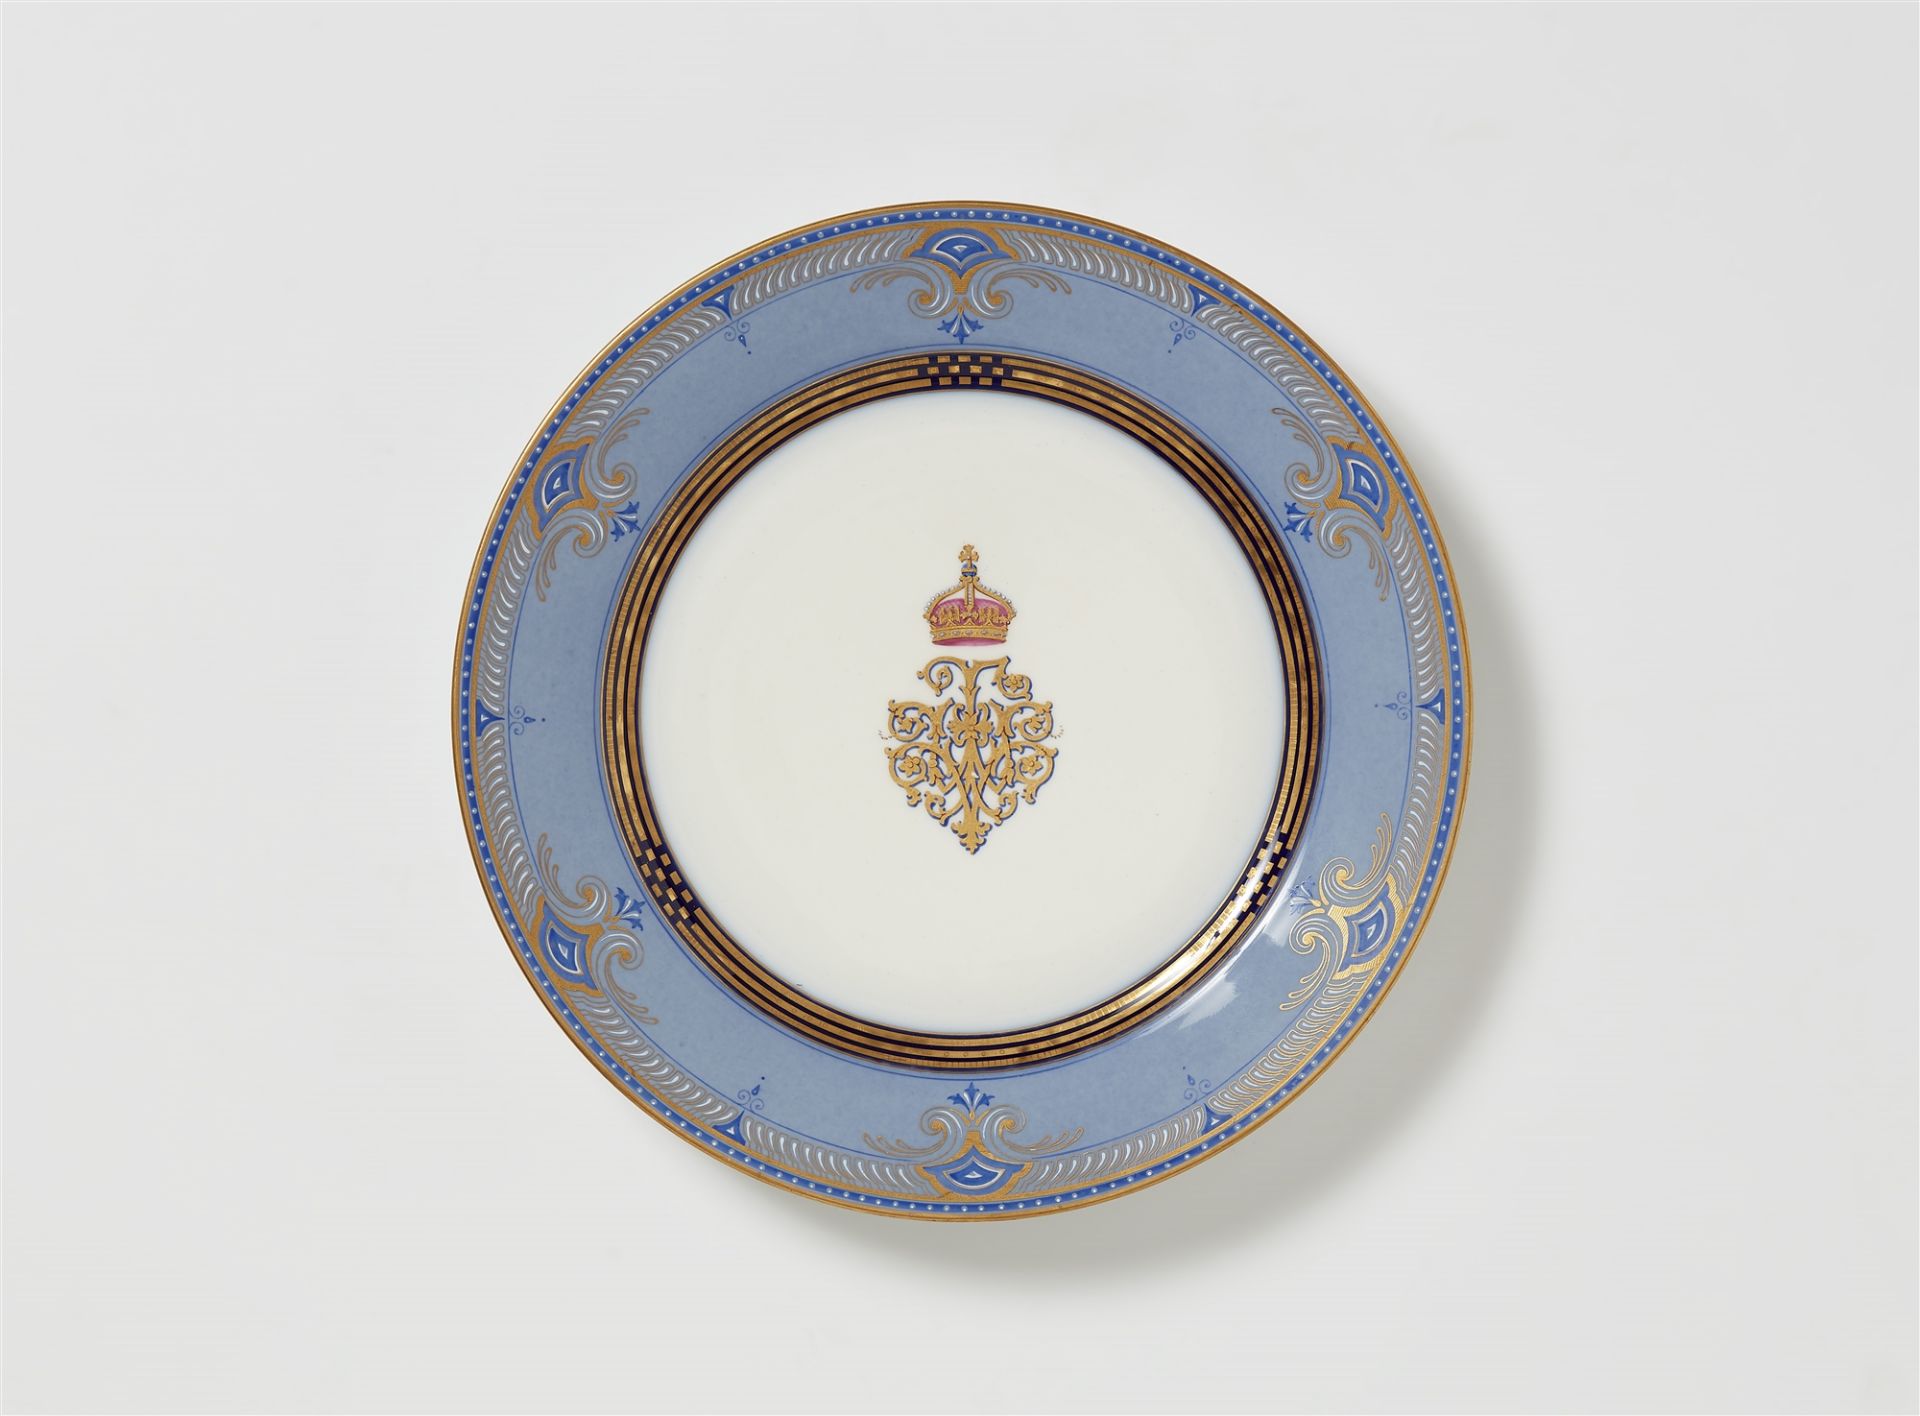 A Sèvres porcelain plate from the dinner service for Crown Prince Wilhelm and Princess Royal Victori